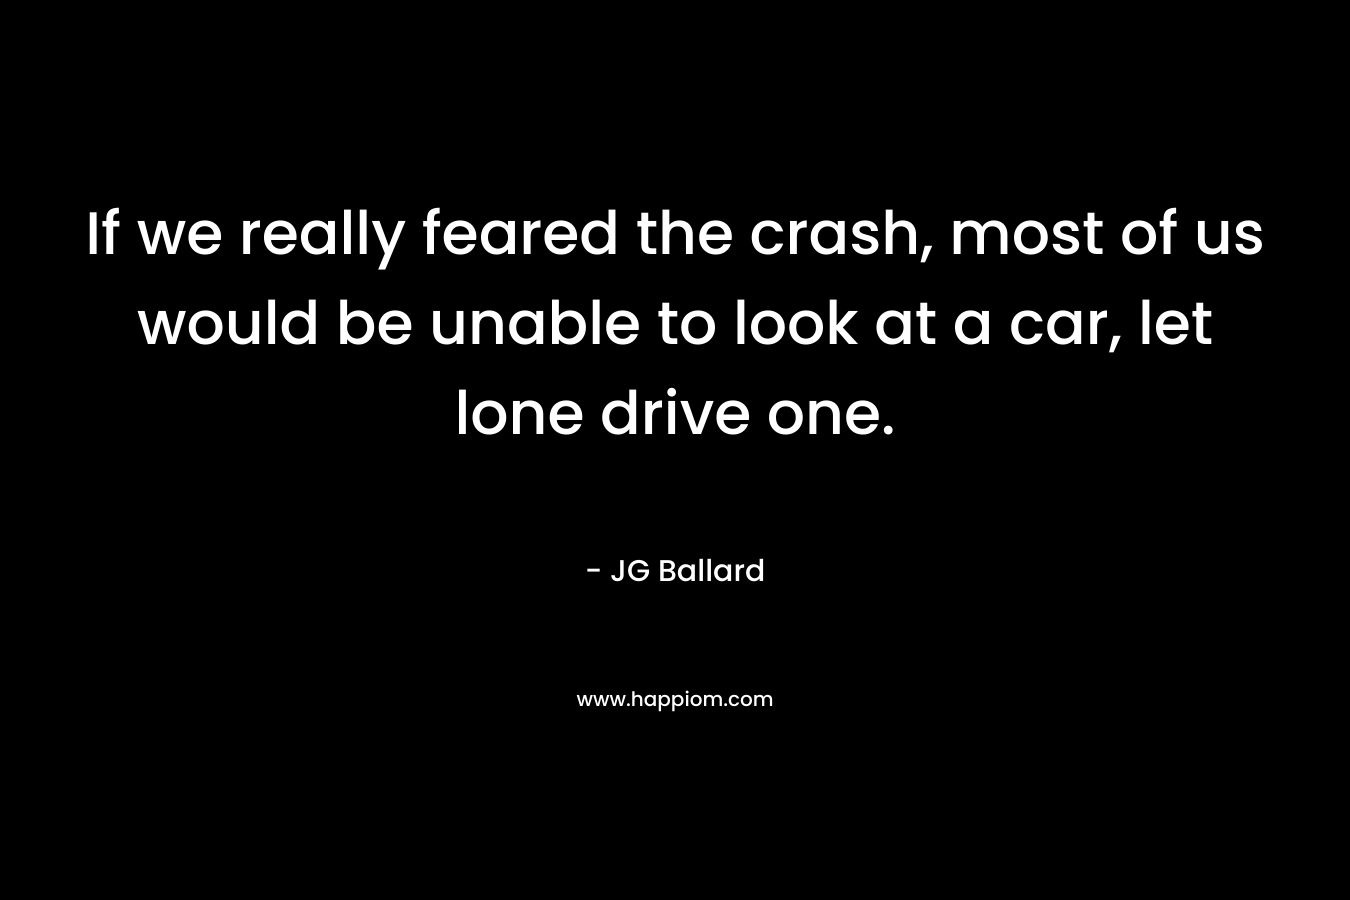 If we really feared the crash, most of us would be unable to look at a car, let lone drive one. – JG Ballard